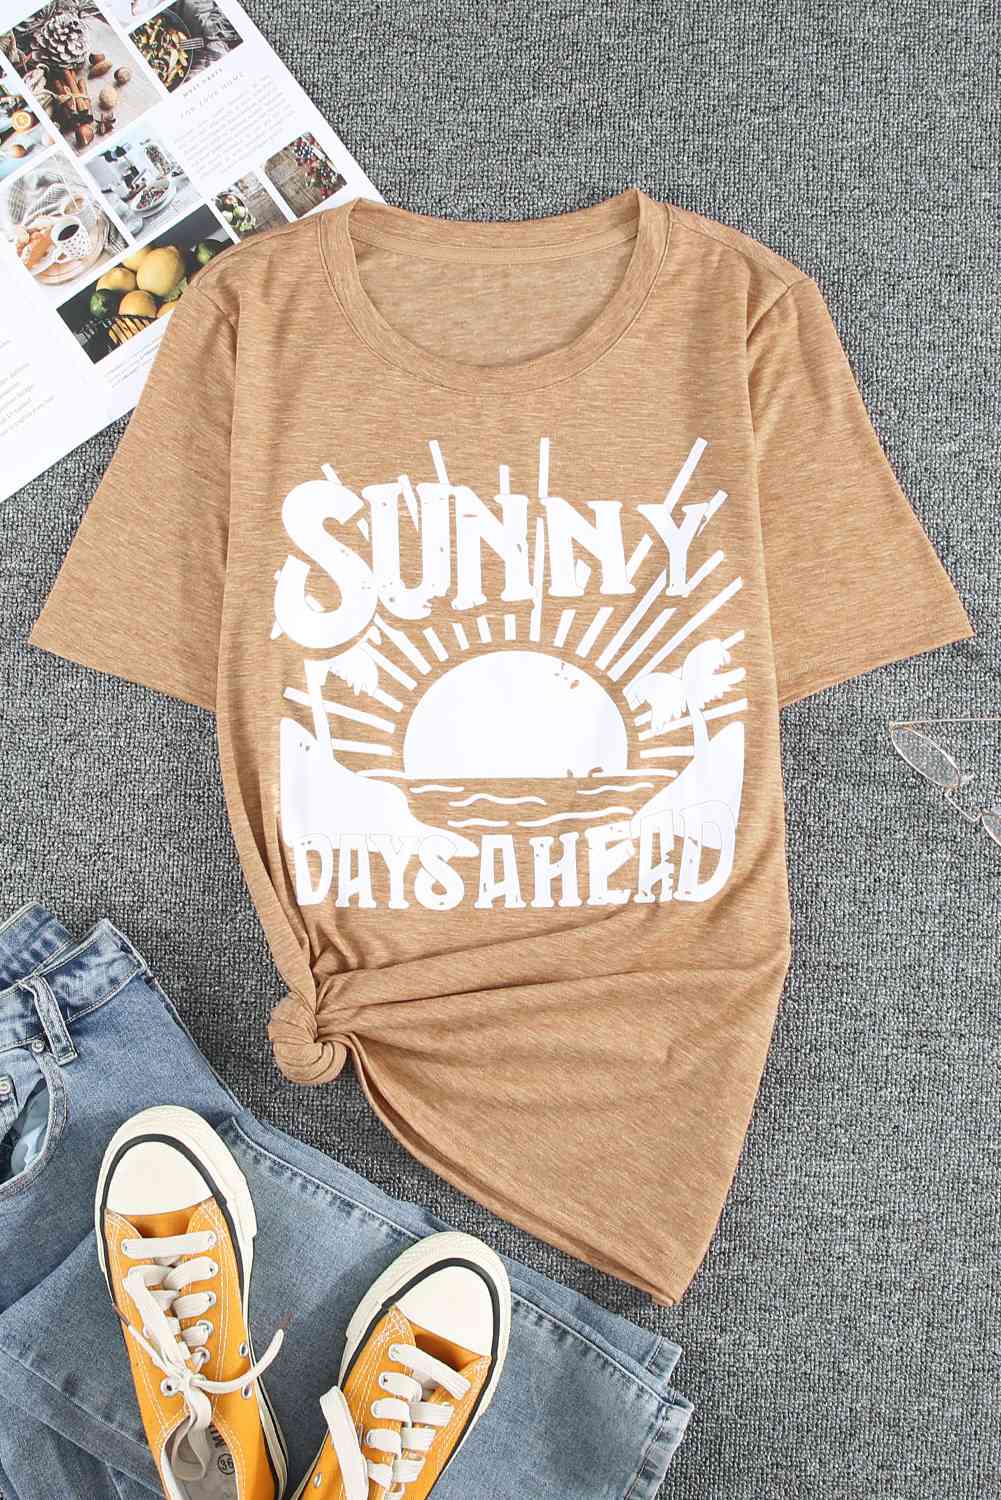 SUNNY DAYS AHEAD Tee Shirt - Shop Tophatter Deals, Electronics, Fashion, Jewelry, Health, Beauty, Home Decor, Free Shipping